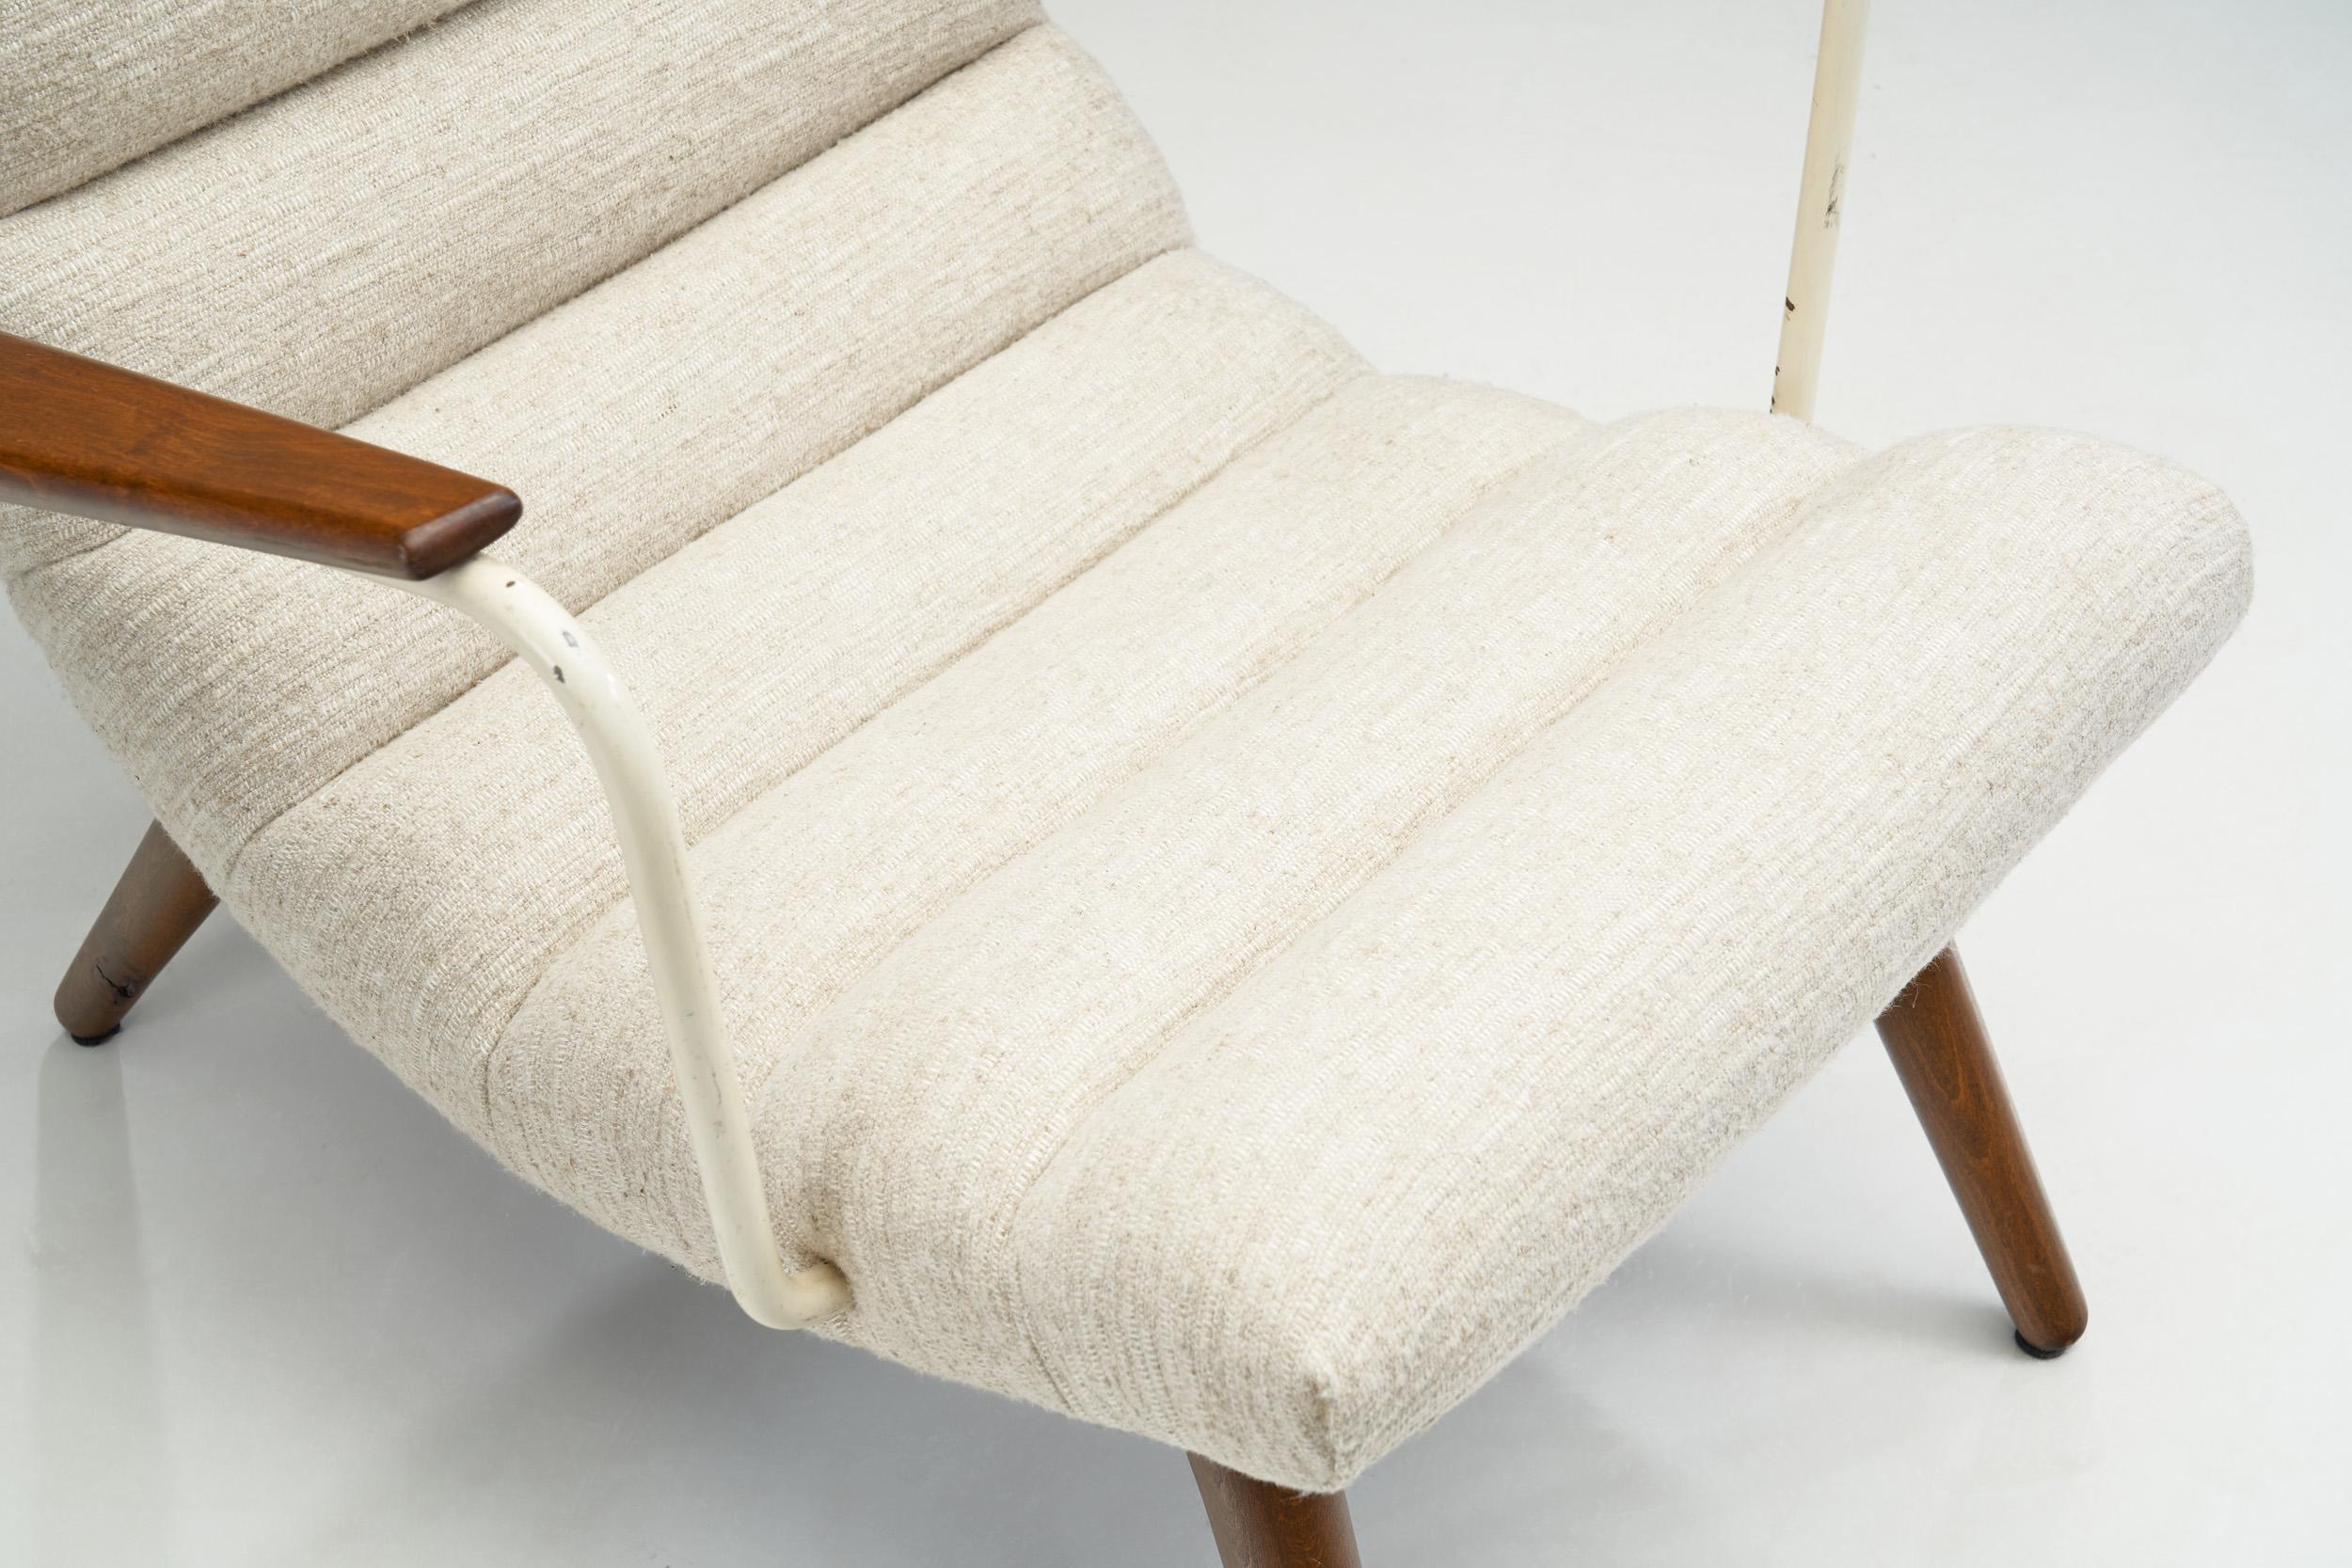 European Mid-Century Modern Lounge Chair, Europe 1950s For Sale 6